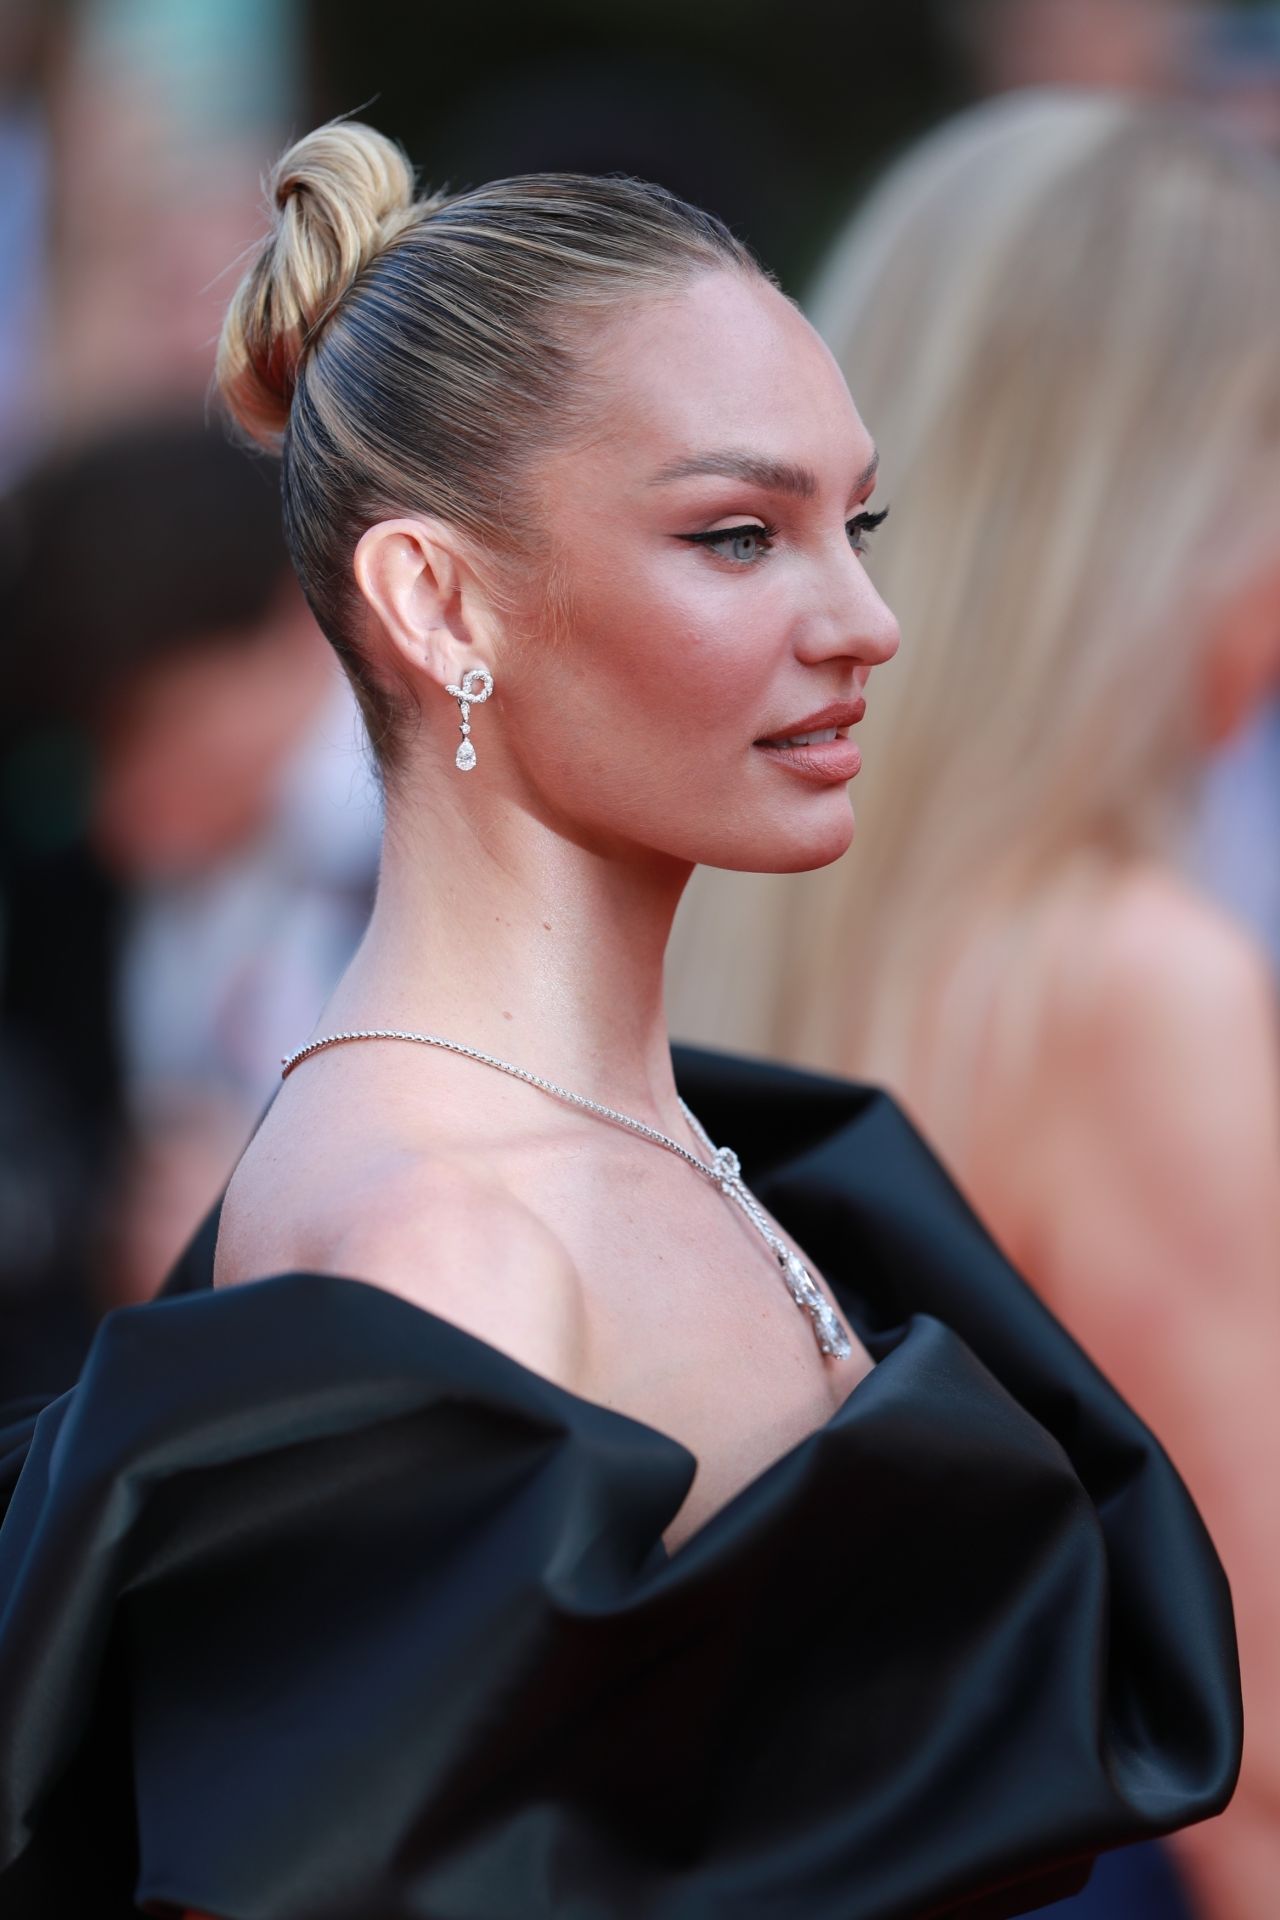 Candice Swanepoel at "Horizon" Red Carpet at the Cannes Festival 0519